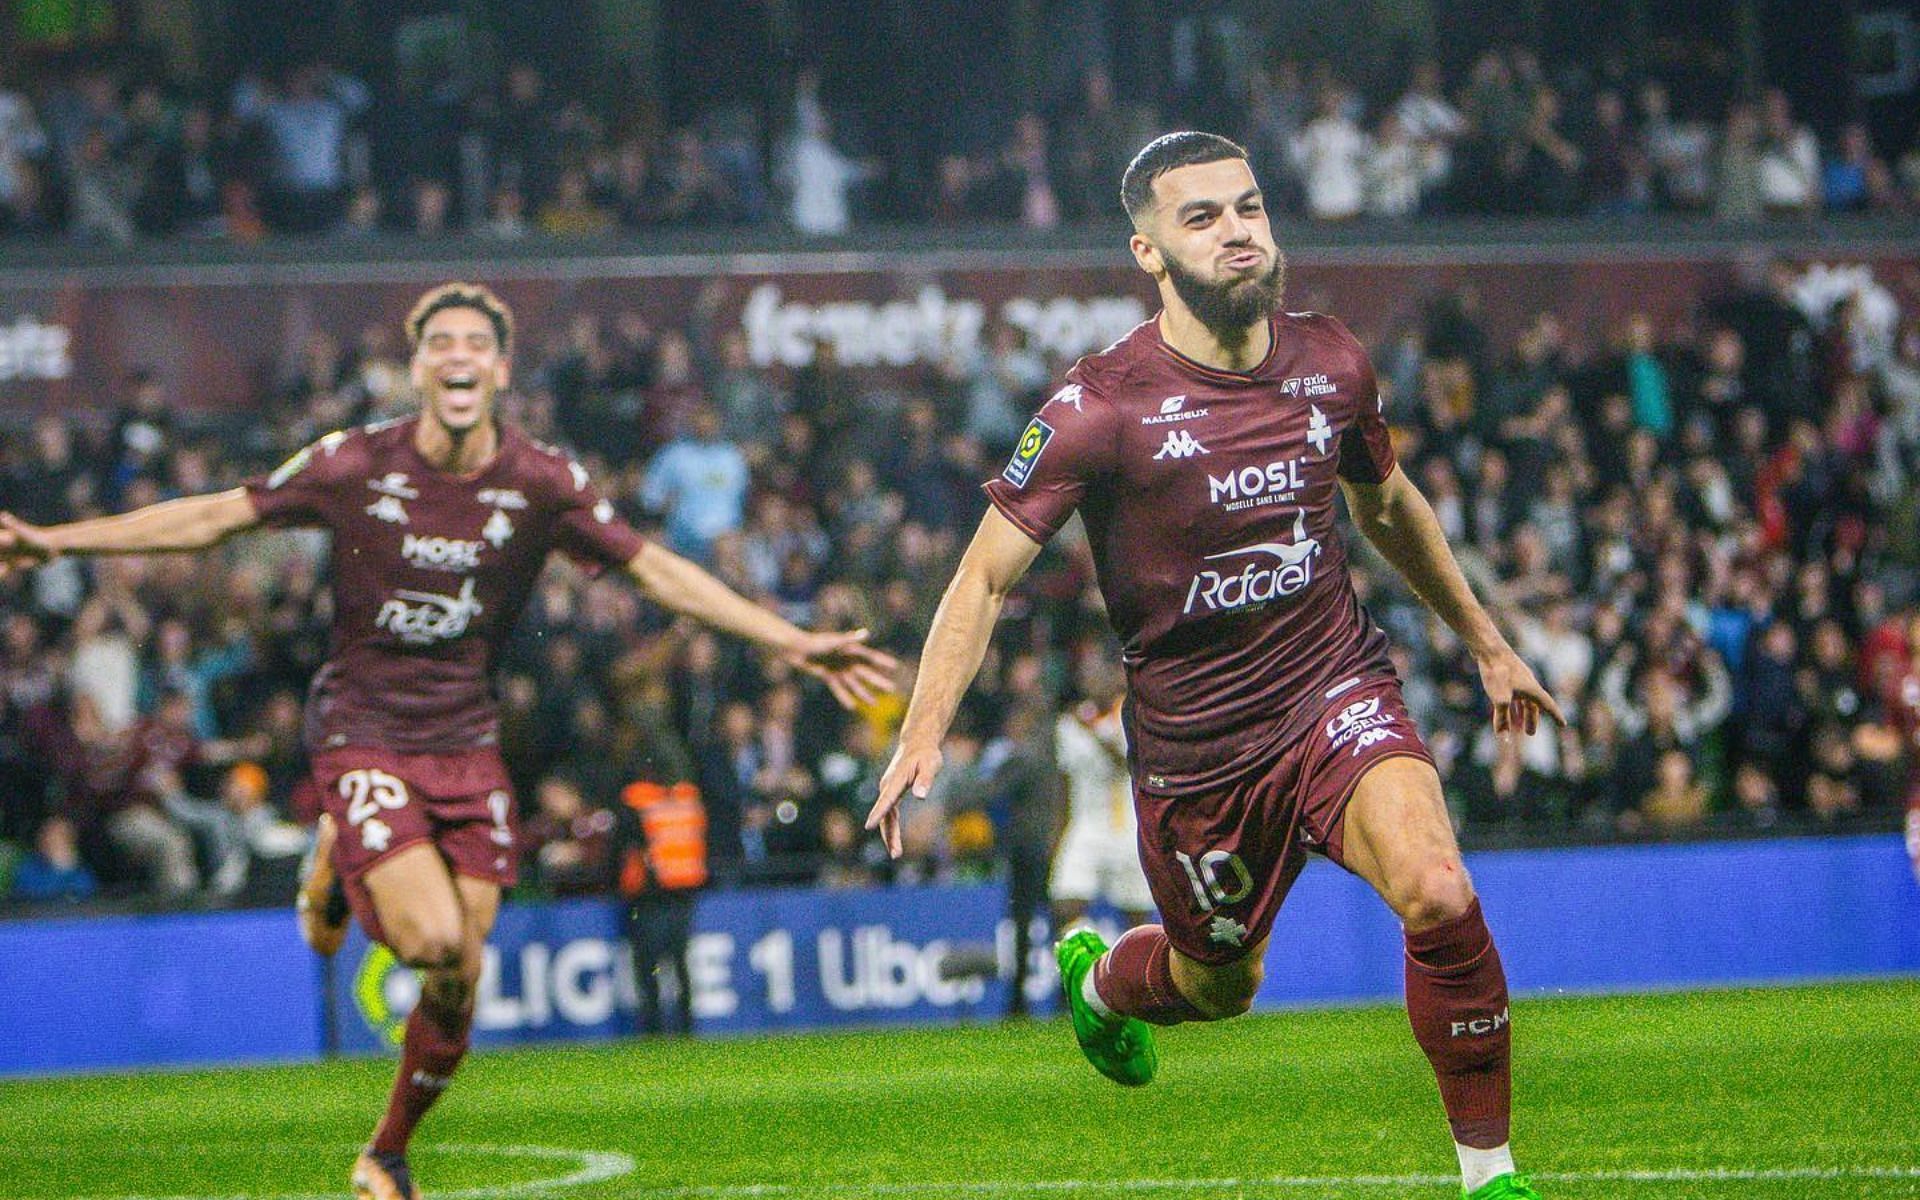 Can the on-form Georges Mikautadze help Metz to a win this weekend?